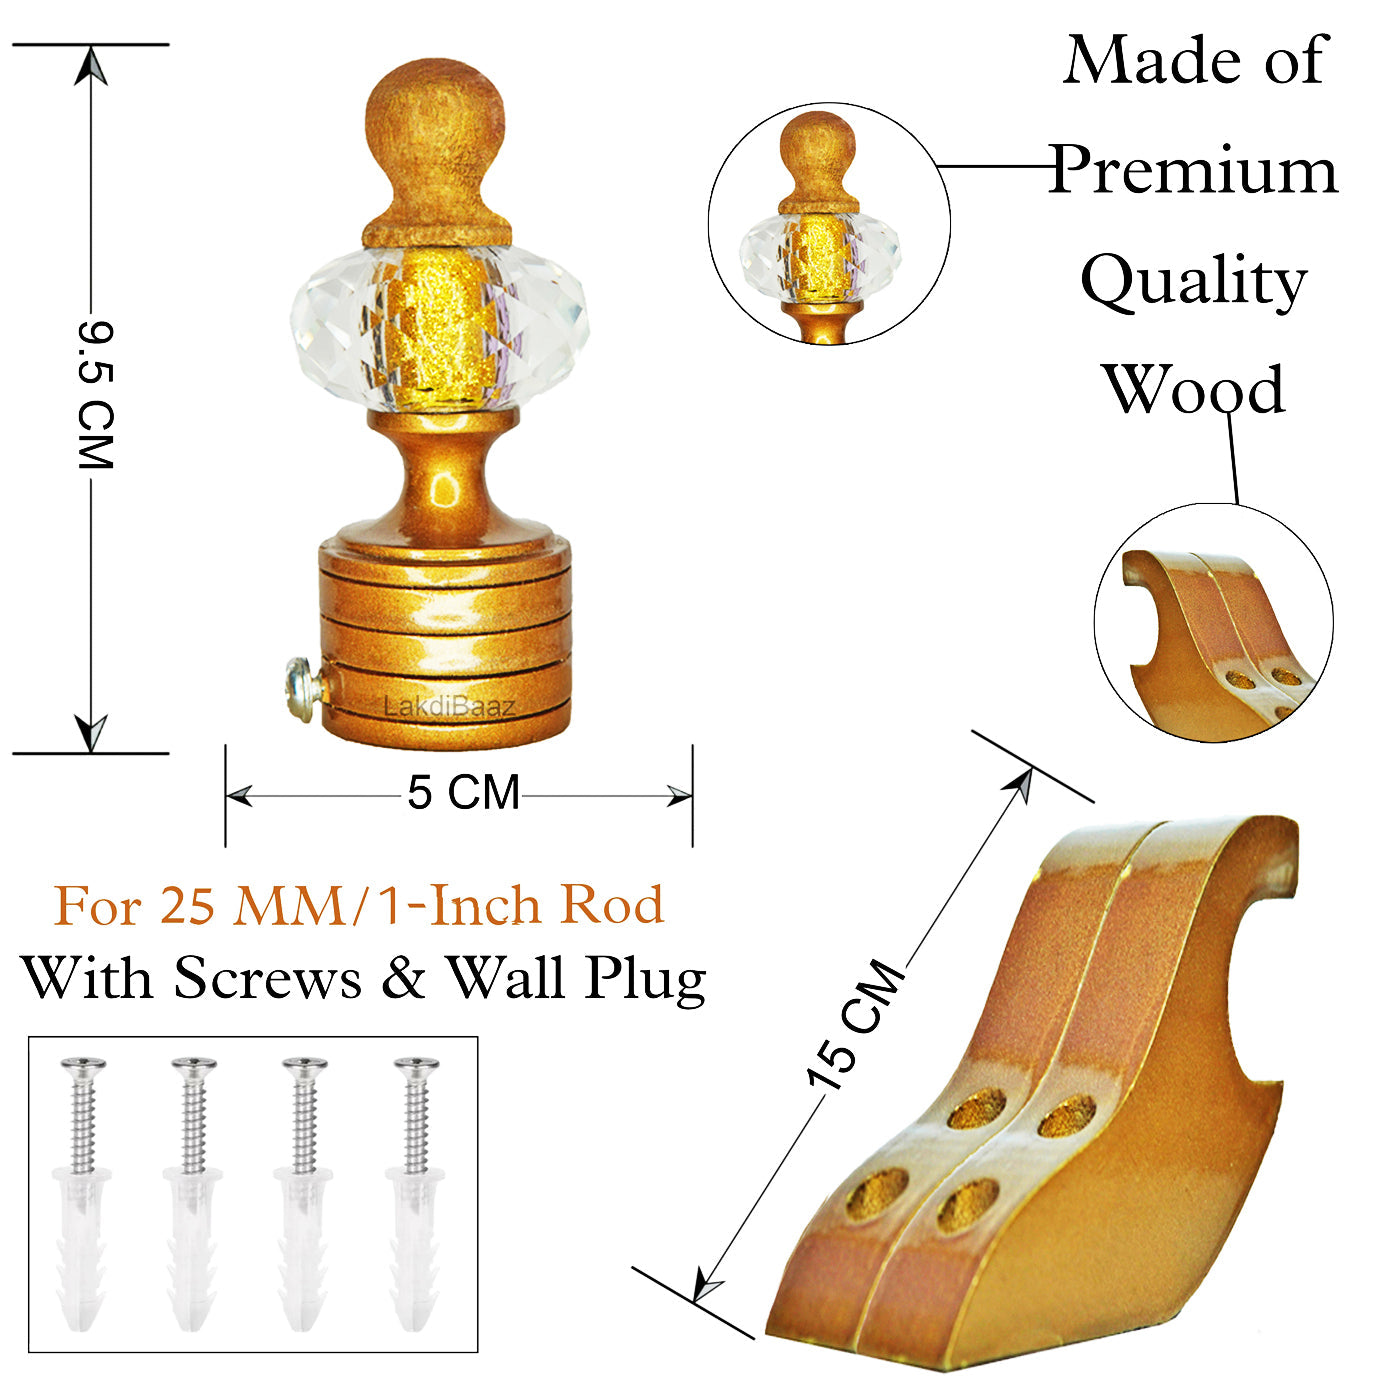 Buy Crystal Gold Paras Wooden Curtain Bracket Finials with Gold Support